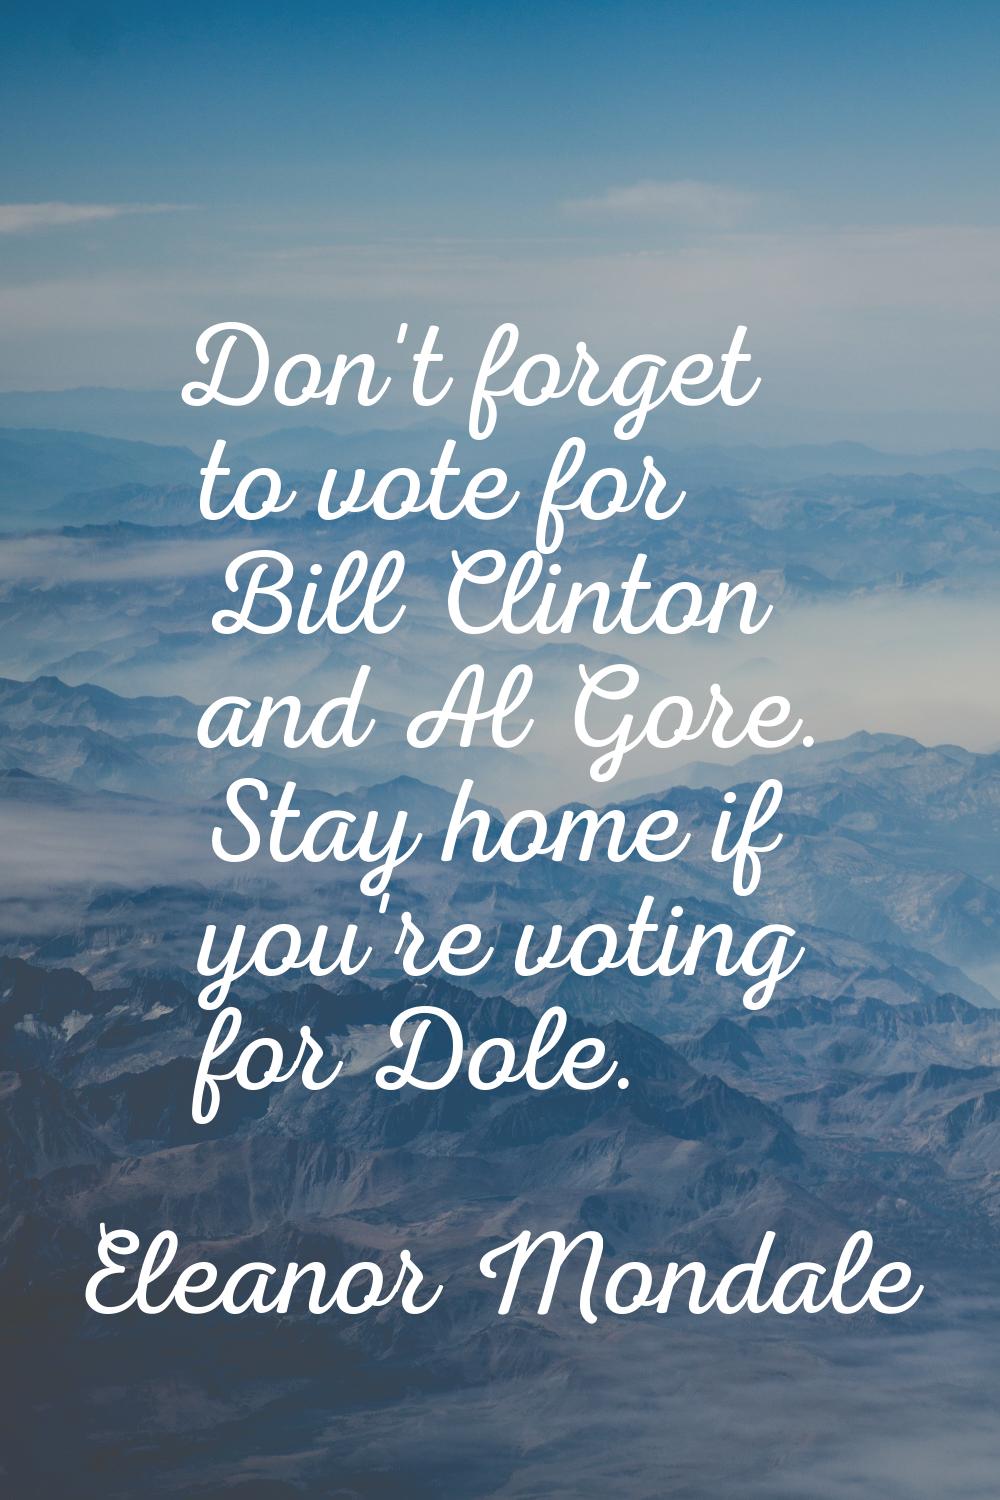 Don't forget to vote for Bill Clinton and Al Gore. Stay home if you're voting for Dole.